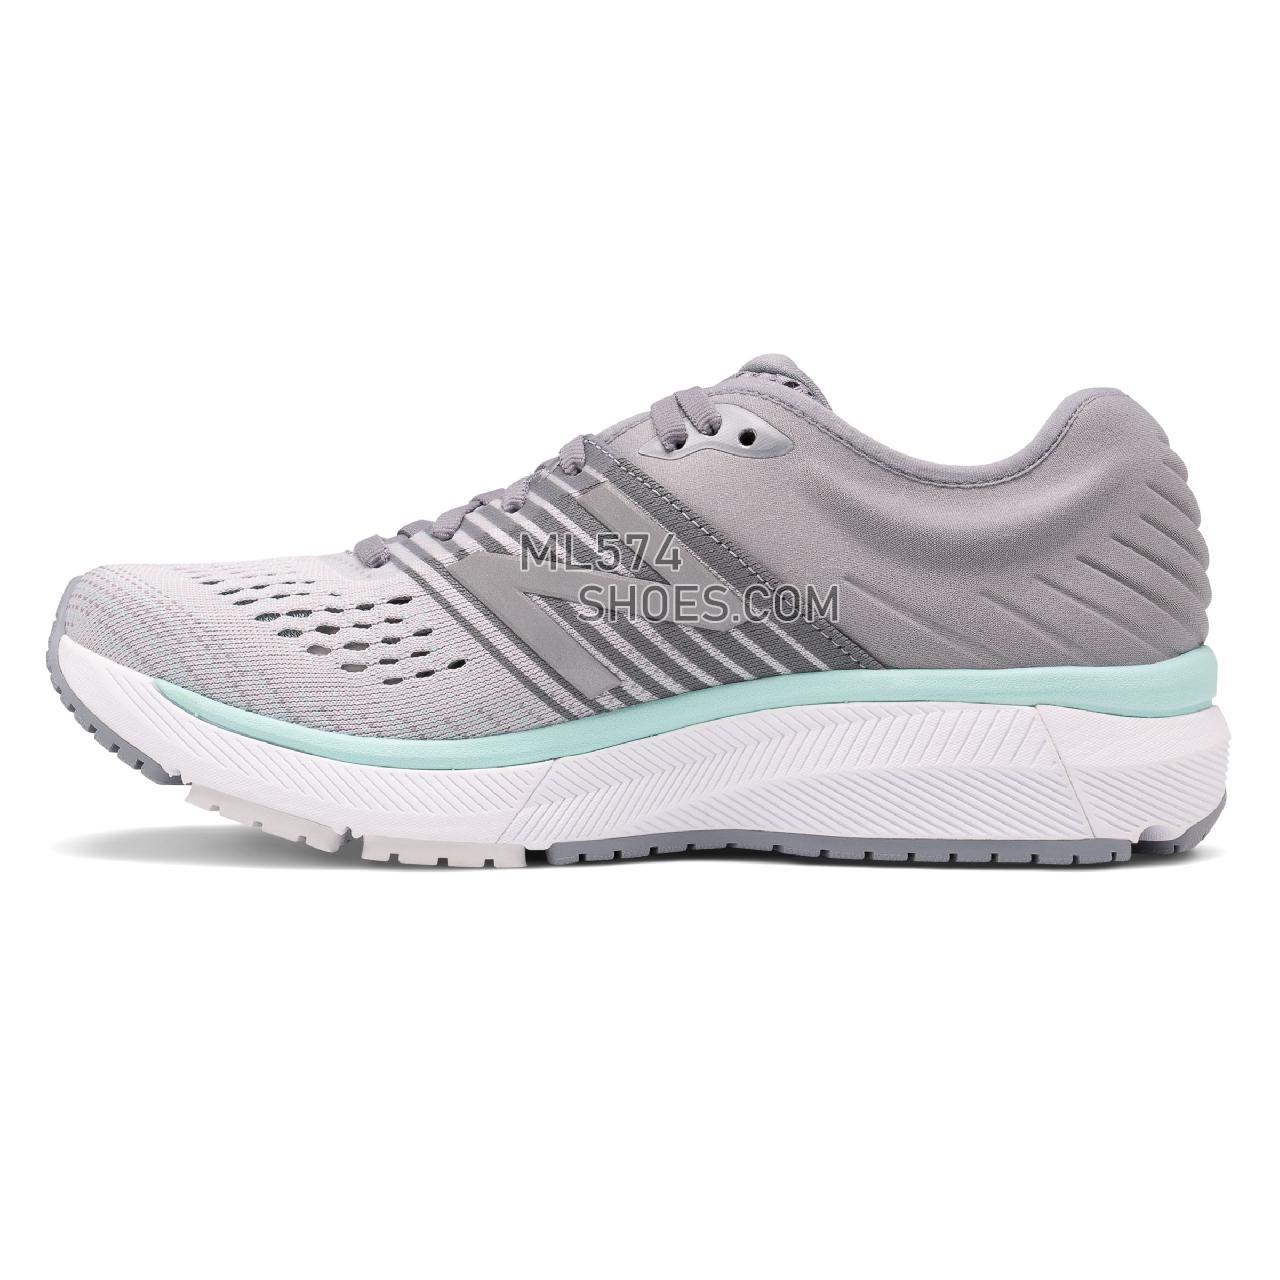 New Balance 860v10 - Women's Stability Running - Steel with Light Aluminum and Light Reef - W860P10